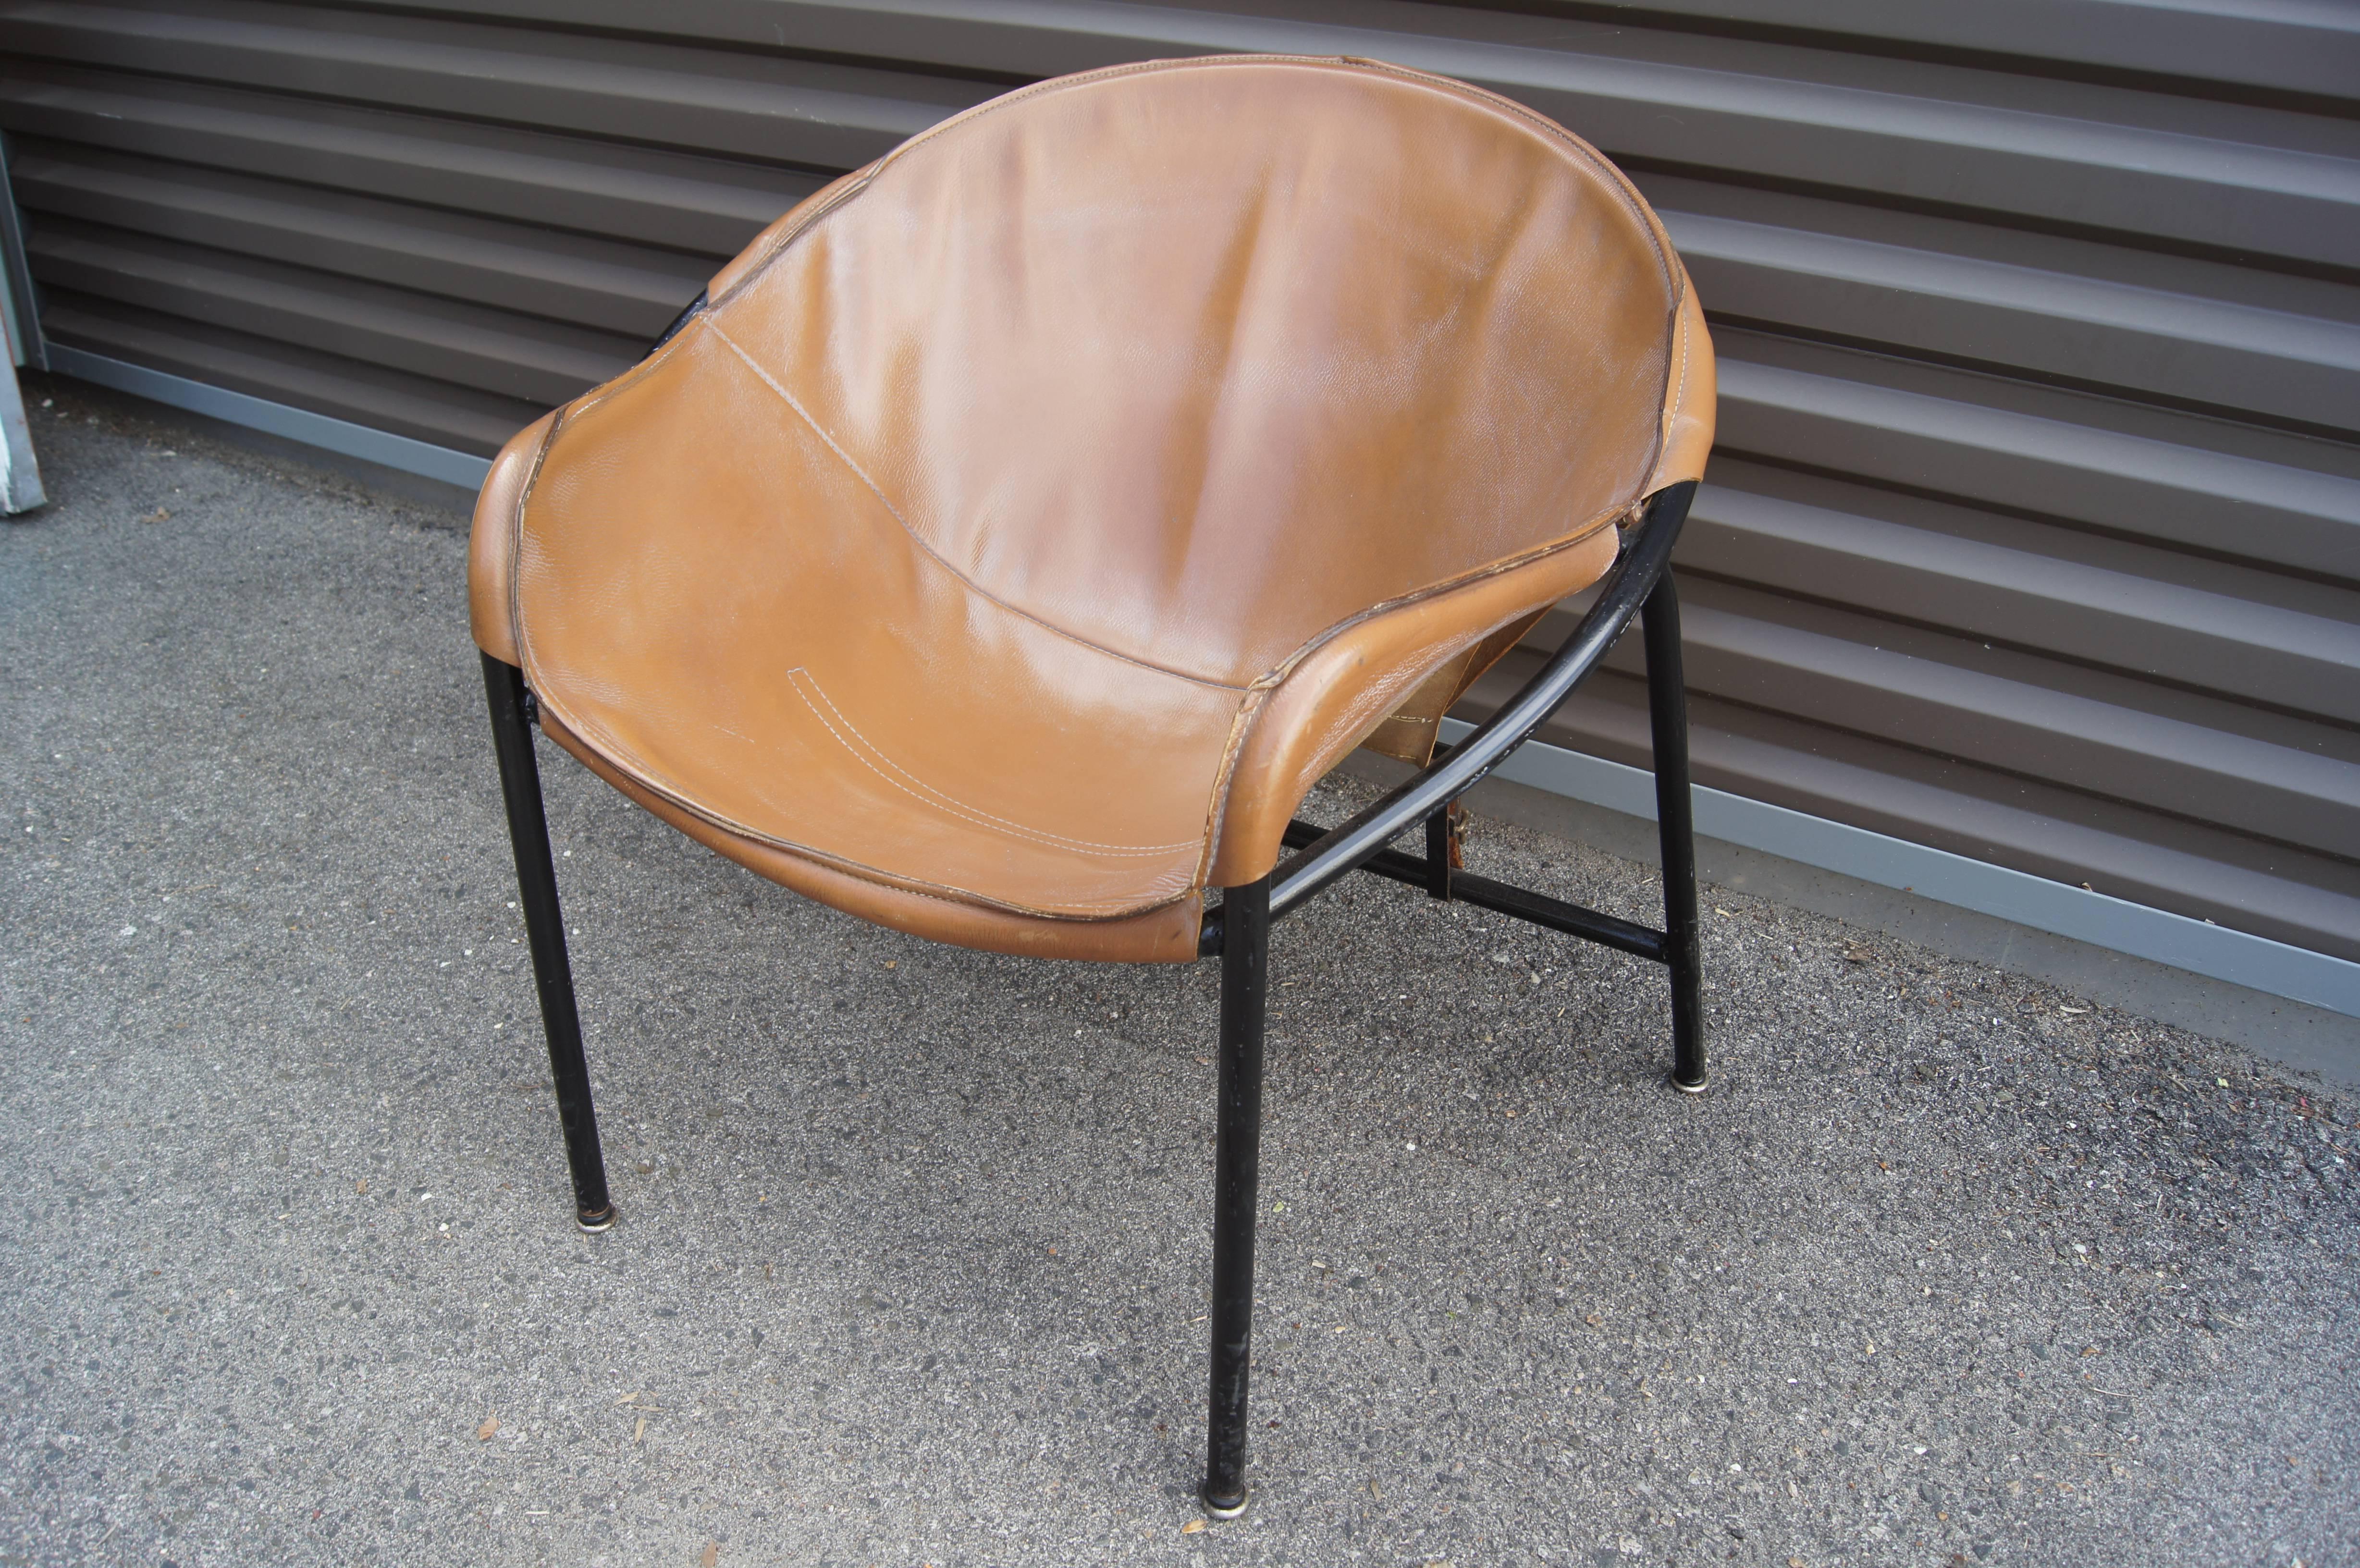 Sling Chair, Model BO 360 by Erik Ole Jørgensen for Olaf Black In Good Condition For Sale In Dorchester, MA